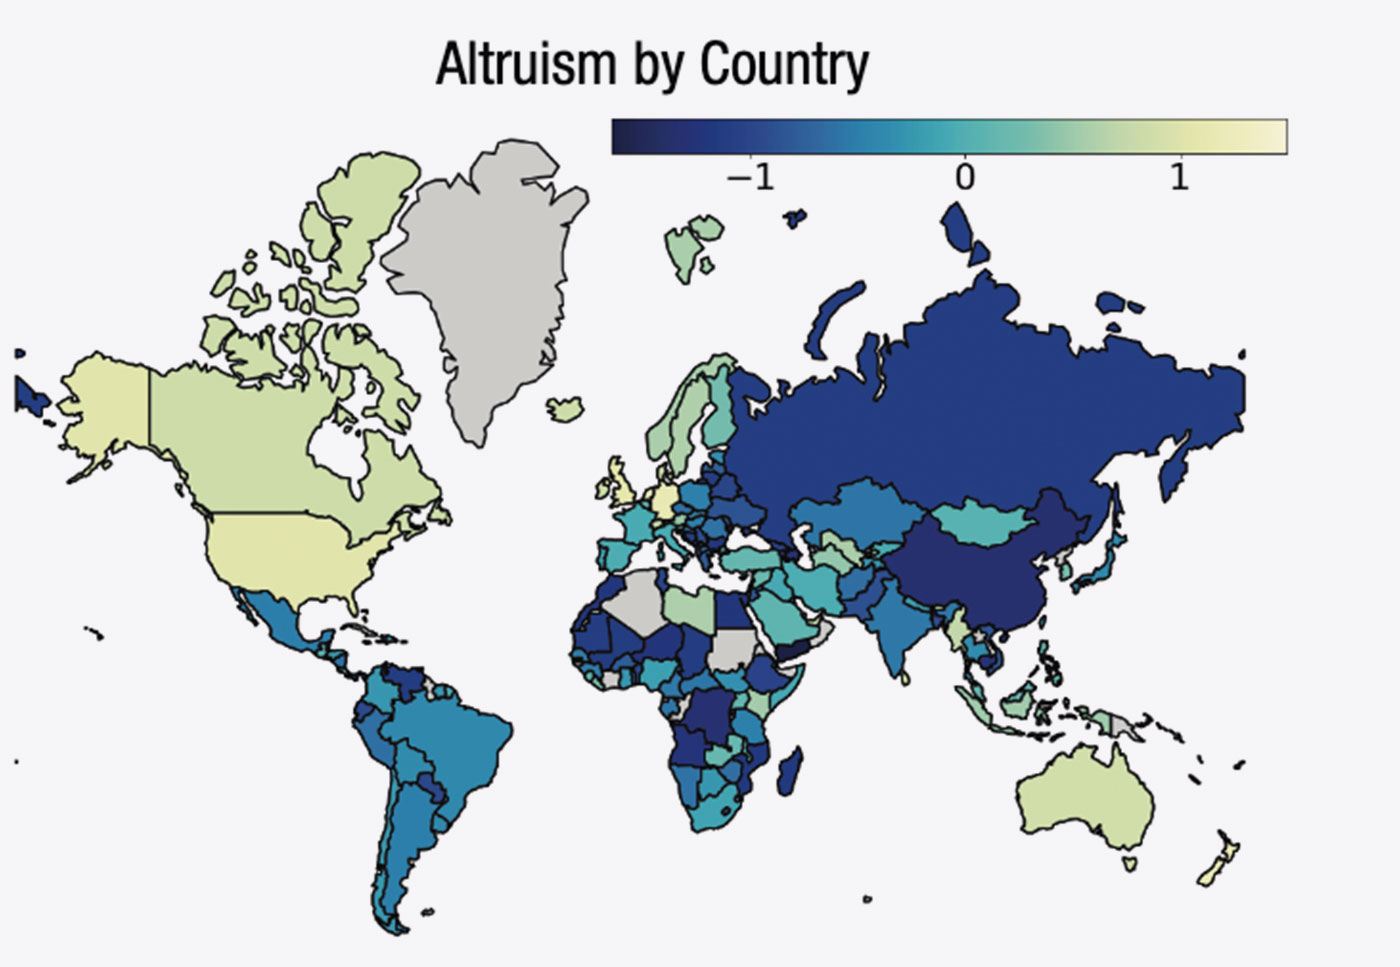 Altruism by Country